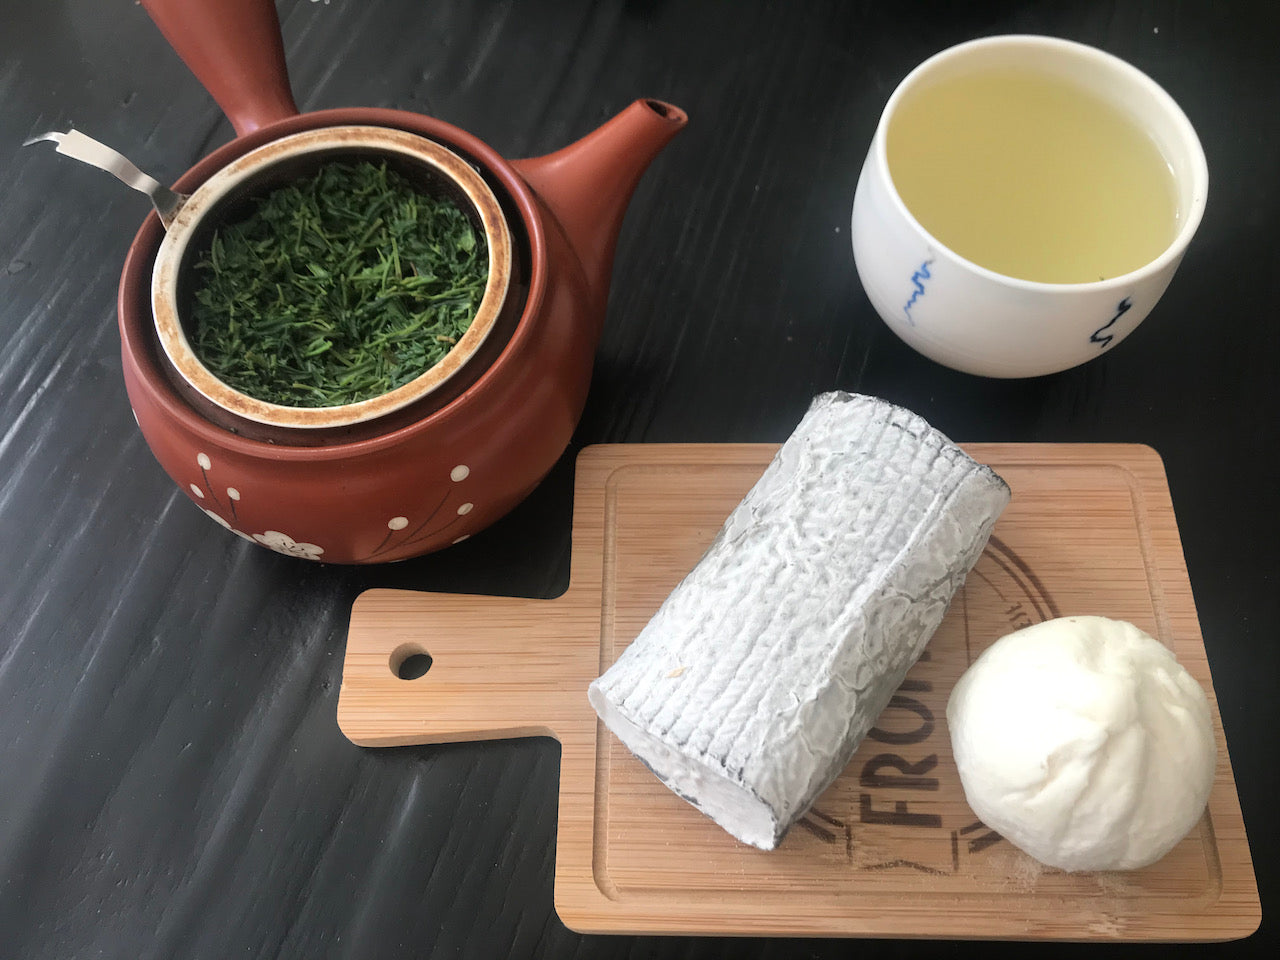 Figuette and gyokuro pairing